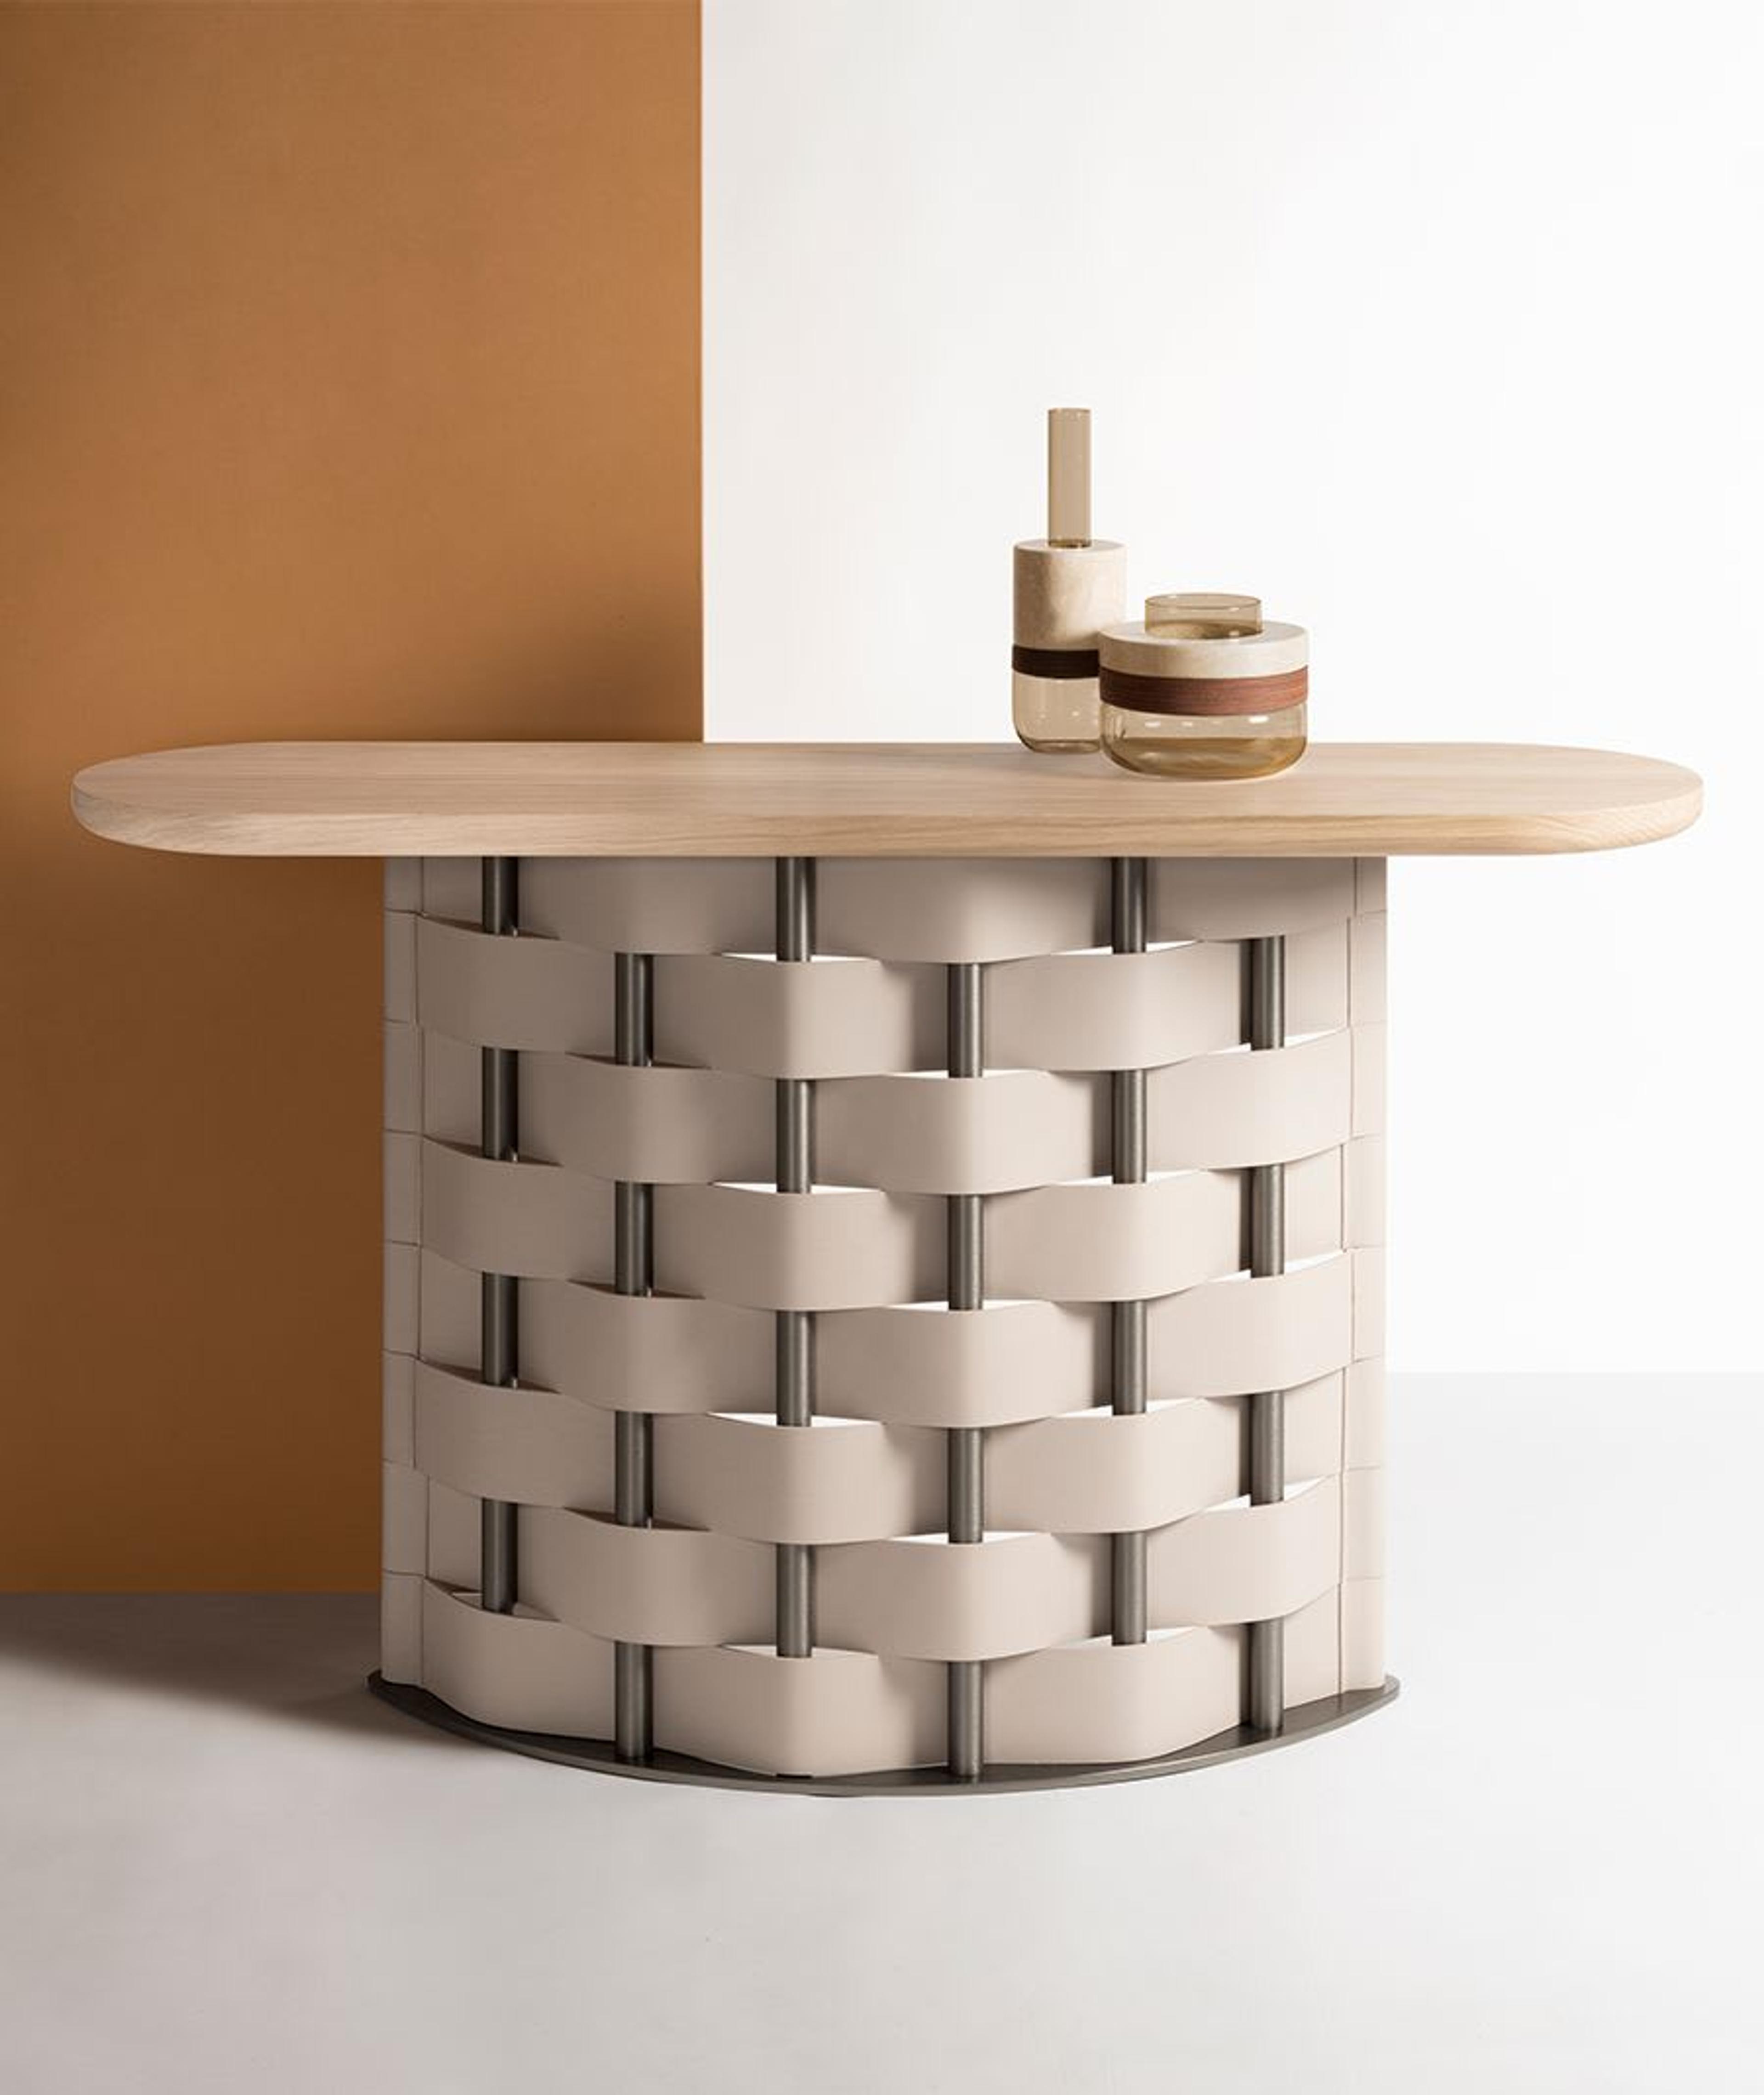 Rabitti's Belvedere Console enriched with braided natural saddle leather and a solid wood top